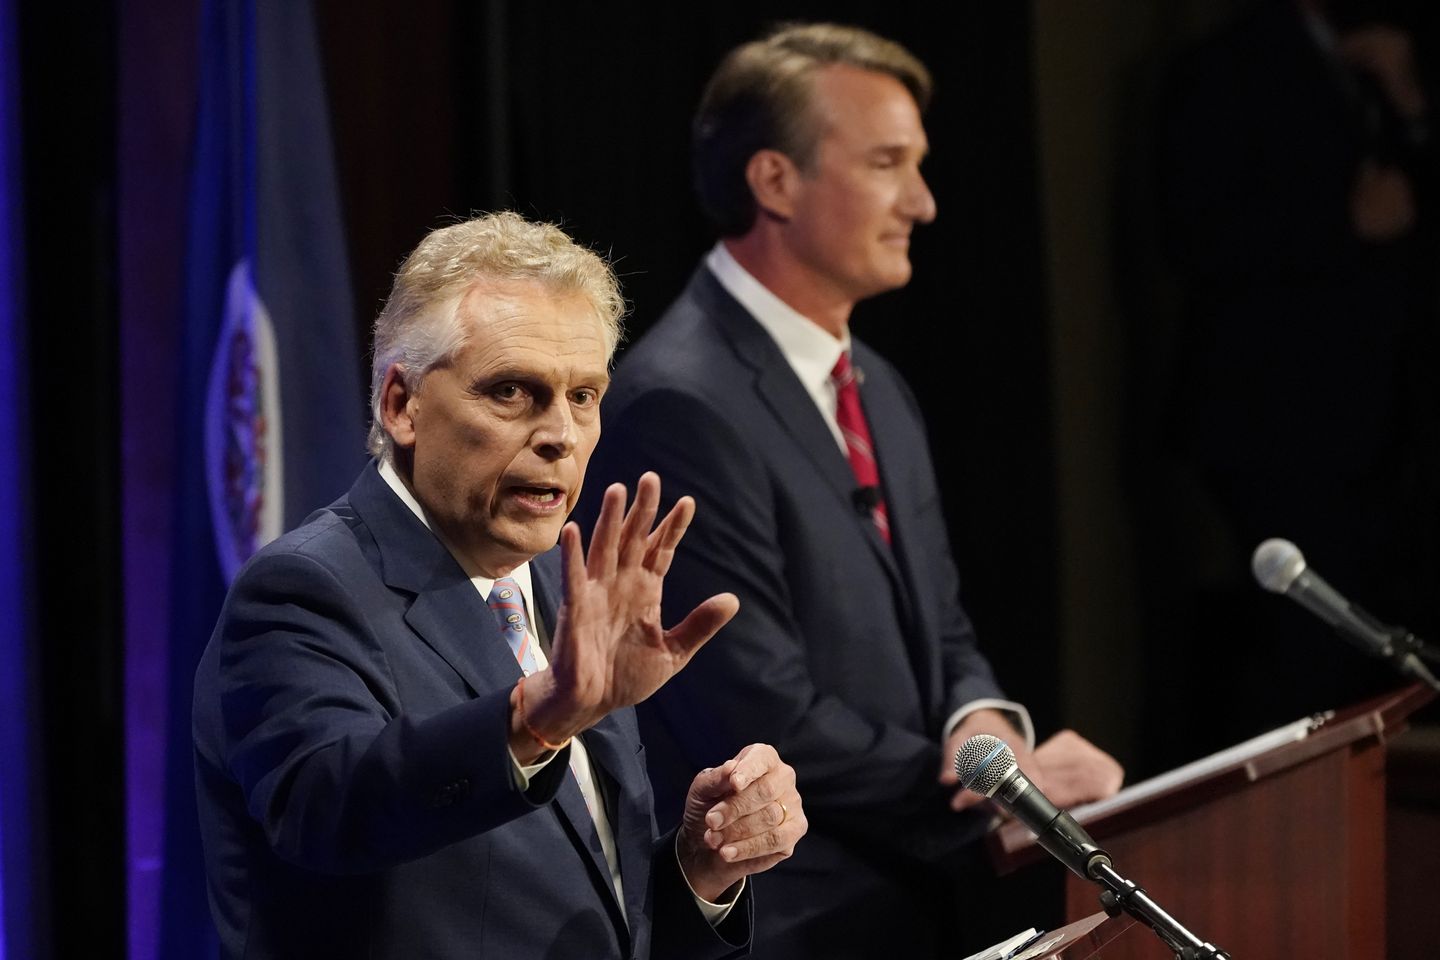 Parents advocacy group launches $1M ad campaign against McAuliffe, invoking safety in schools